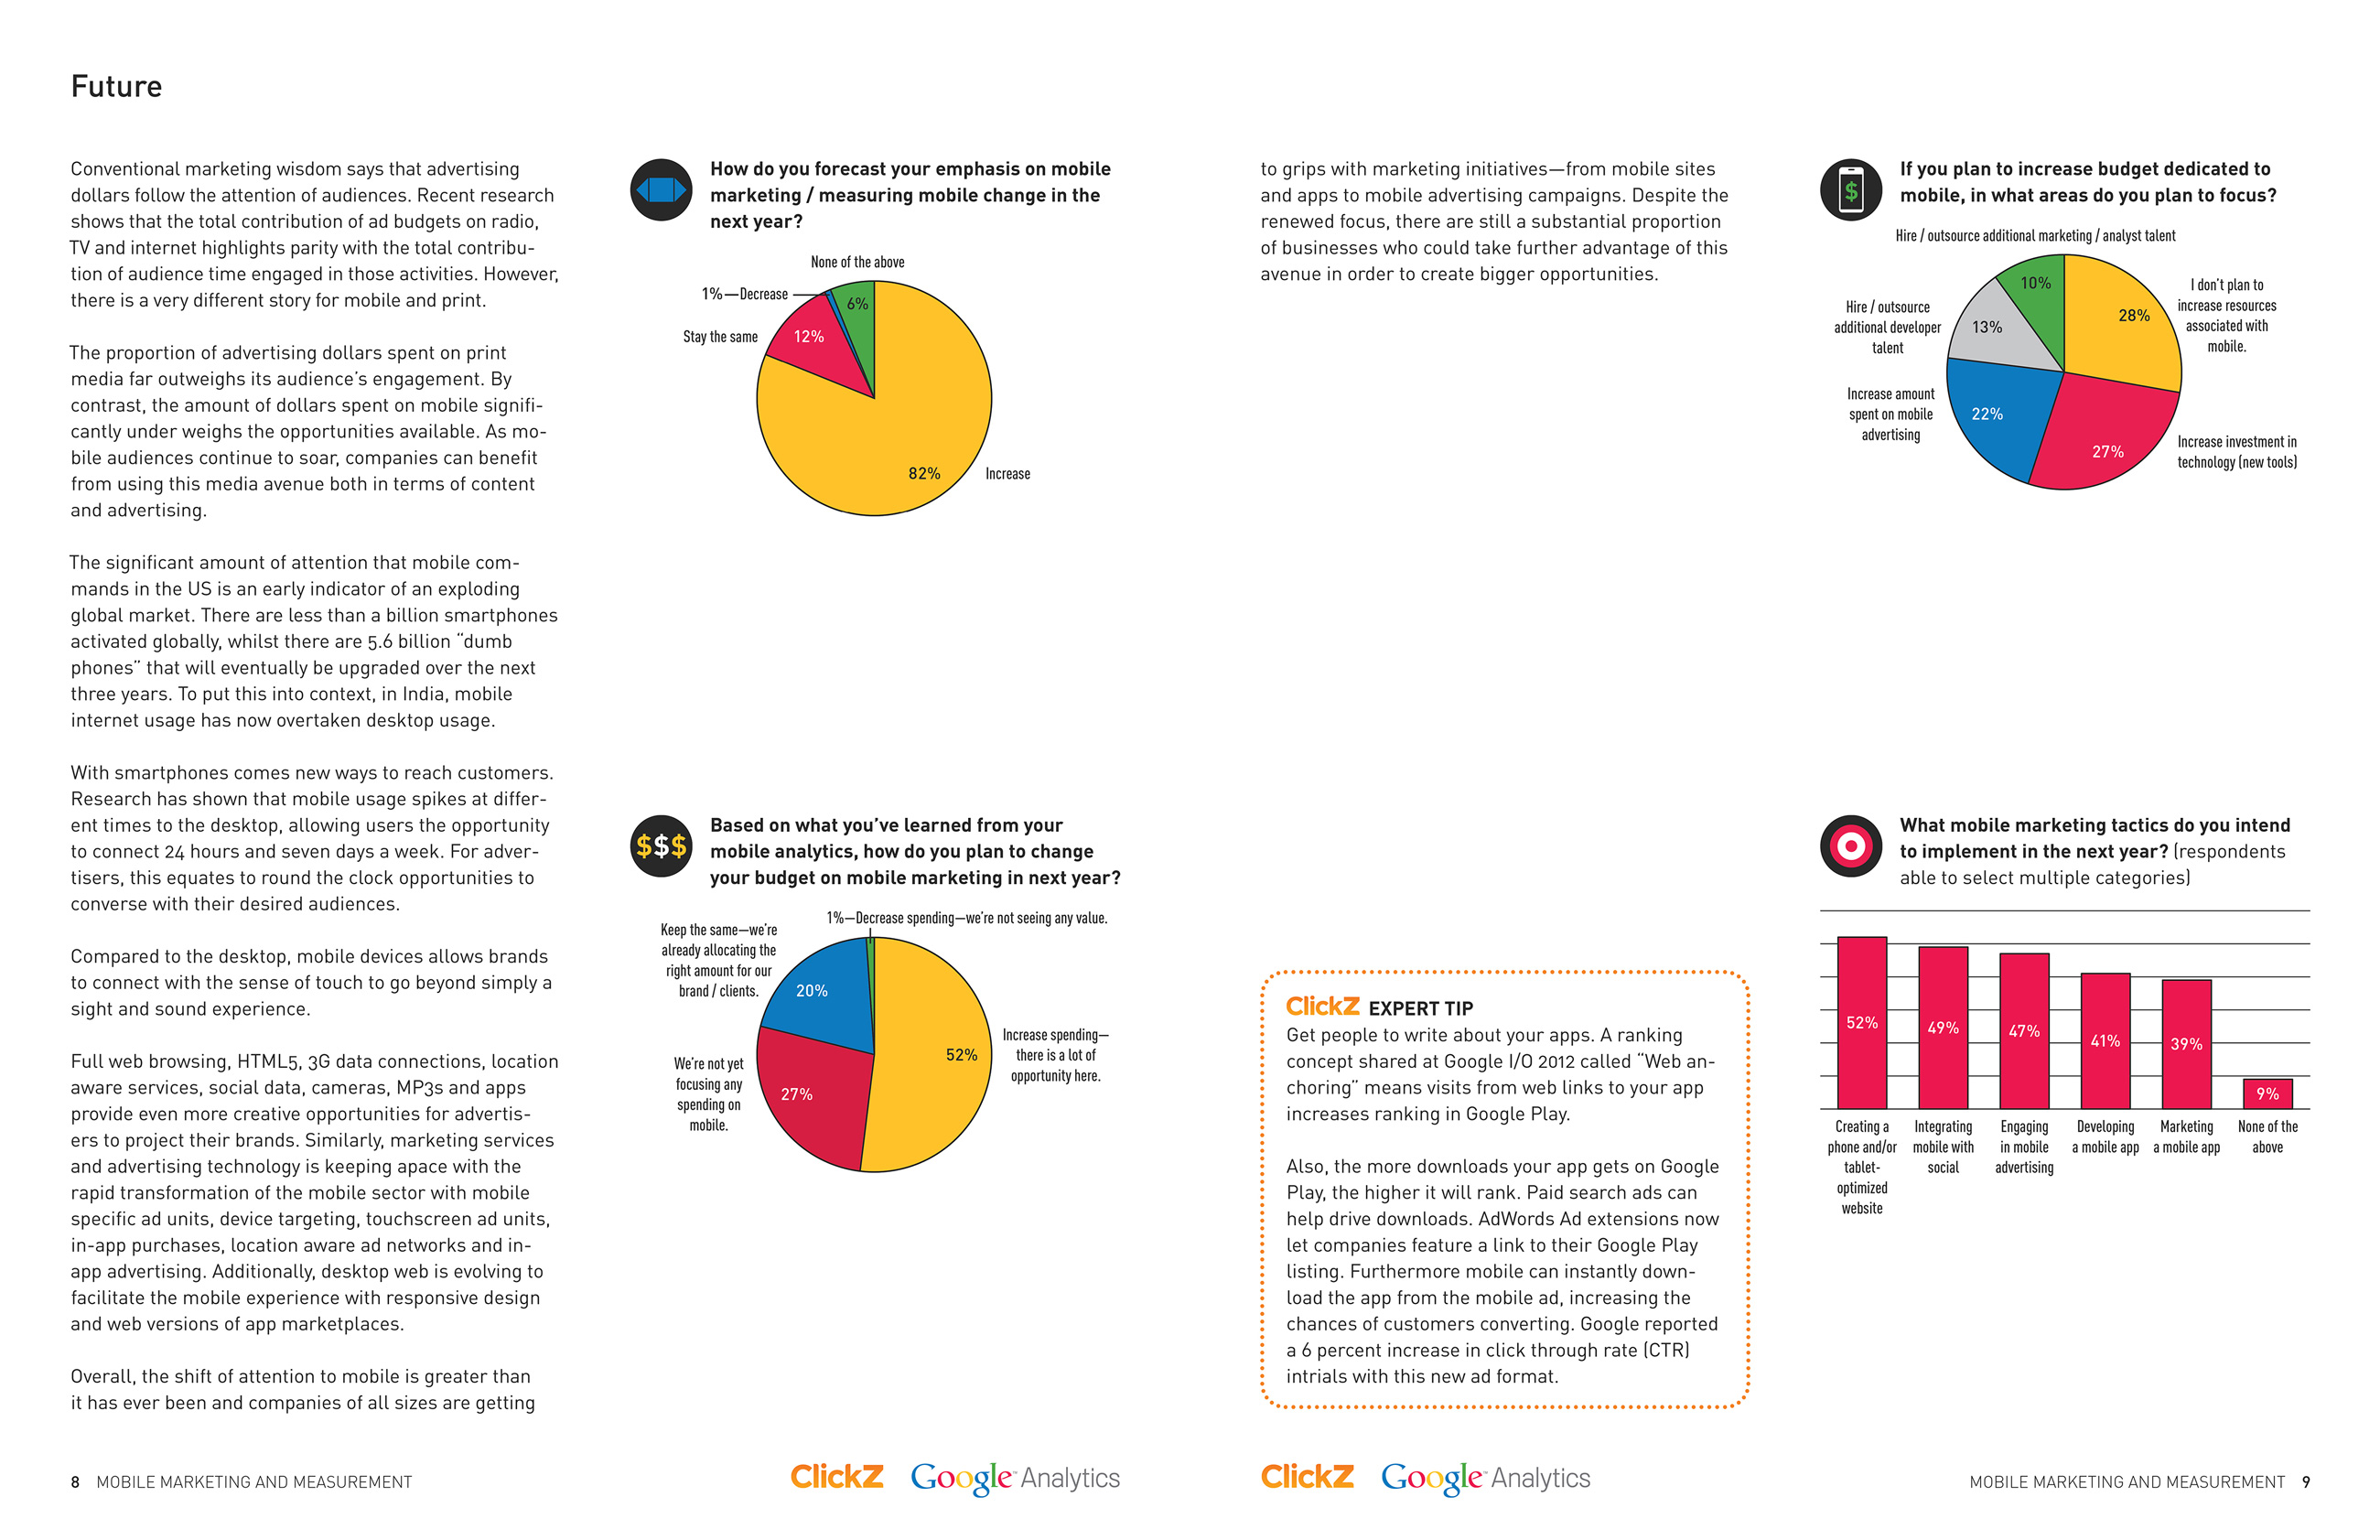 Inside spread of a report titled 'Mobile Marketing and Measurement' and published jointly by ClickZ and Google Analytics. It contains information, three pie graphs, and one bar graph on the future of mobile marketing. The graphs are in Google's colors: red, blue, green, and yellow. It also includes a section that is titled 'Expert Tip' and bordered by ClickZ's color, orange. The tip is about ways to improve rank on Google Play.